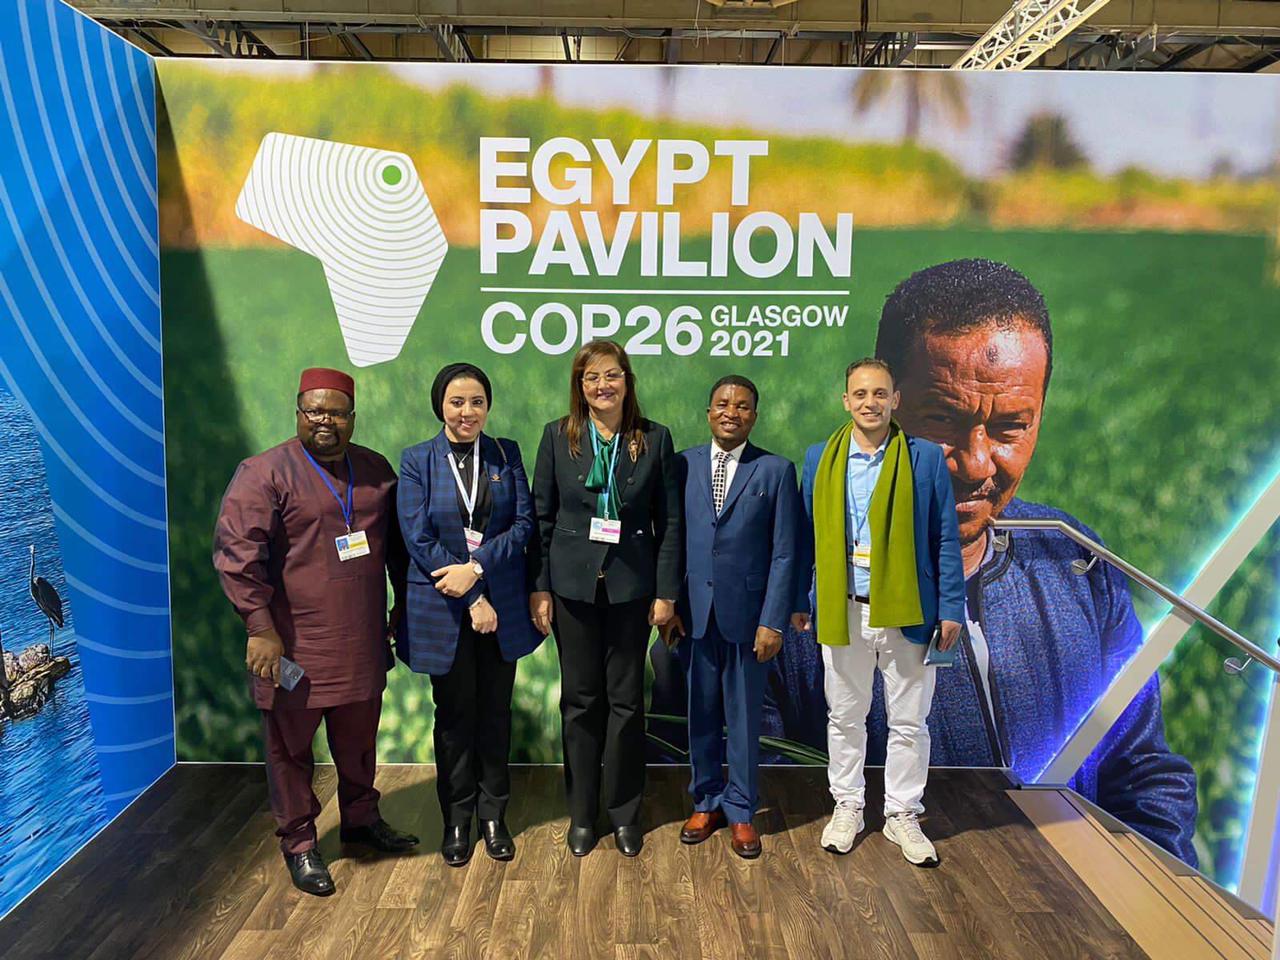 the Minister of Planning and Economic Development meets Fathy in Cop26